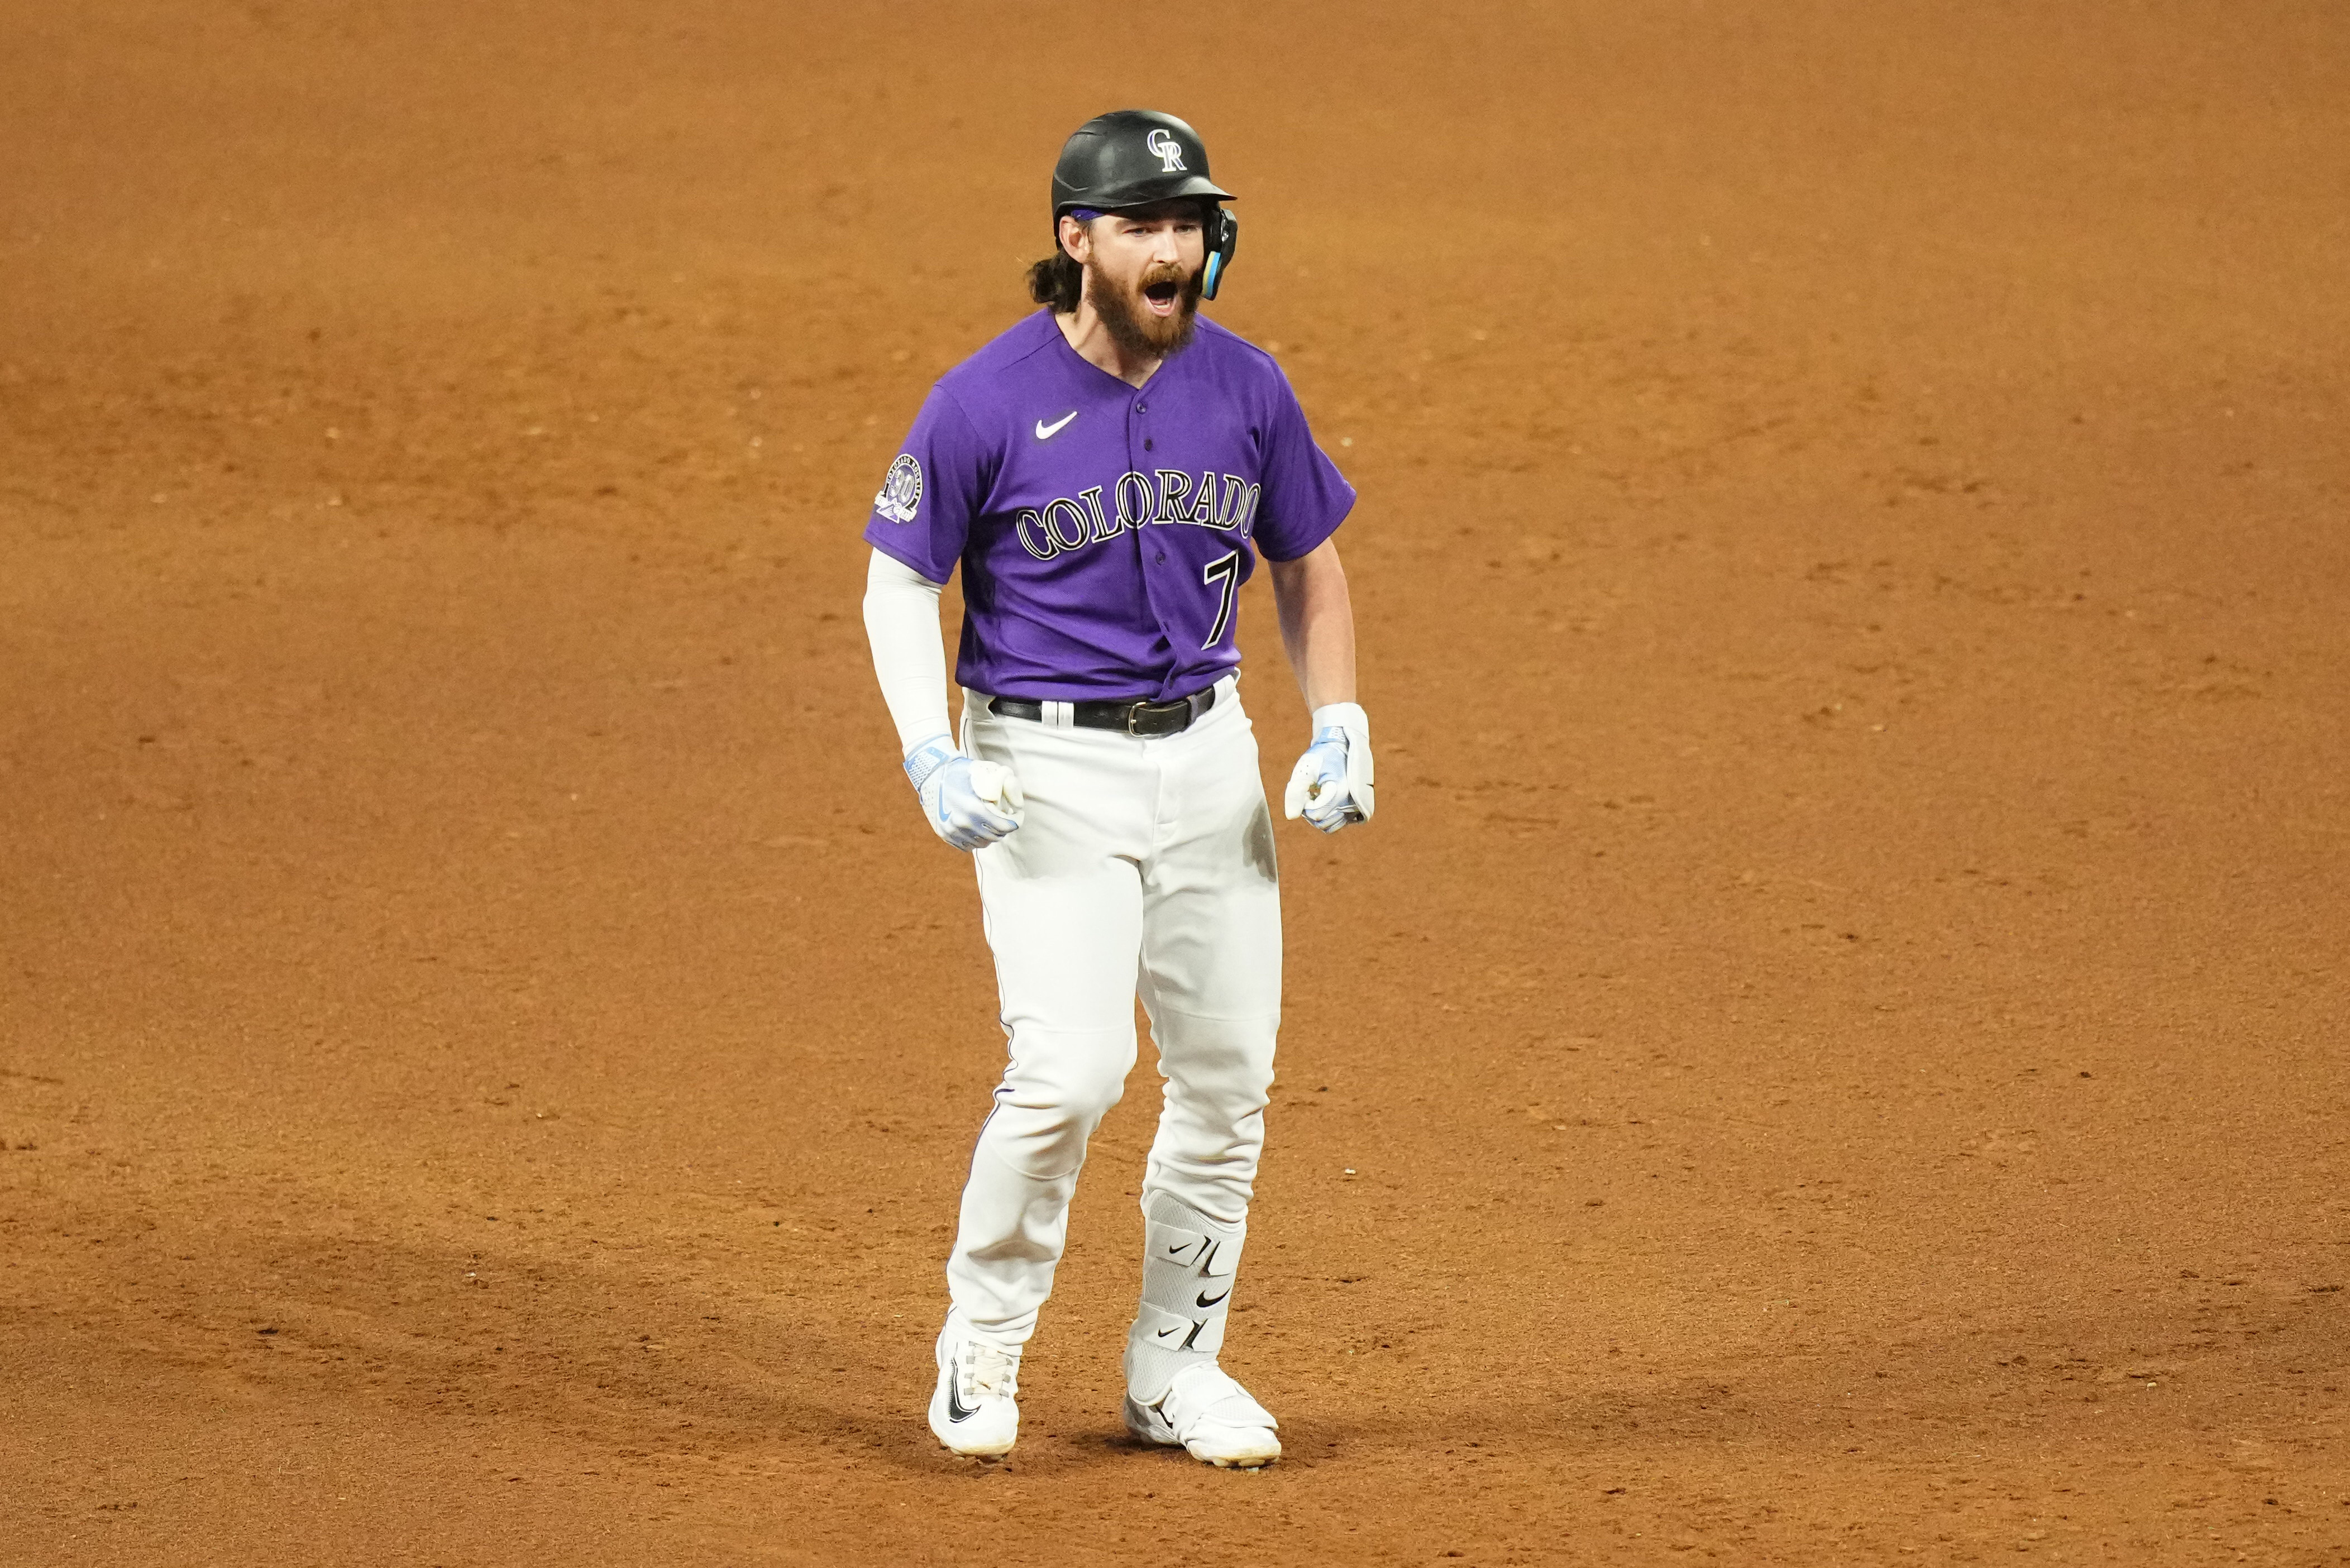 DENVER, CO - JUNE 14: Colorado Rockies right fielder Charlie Blackmon (19)  advances to third base in the tenth inning during a game between the  Cleveland Guardians and the Colorado Rockies at